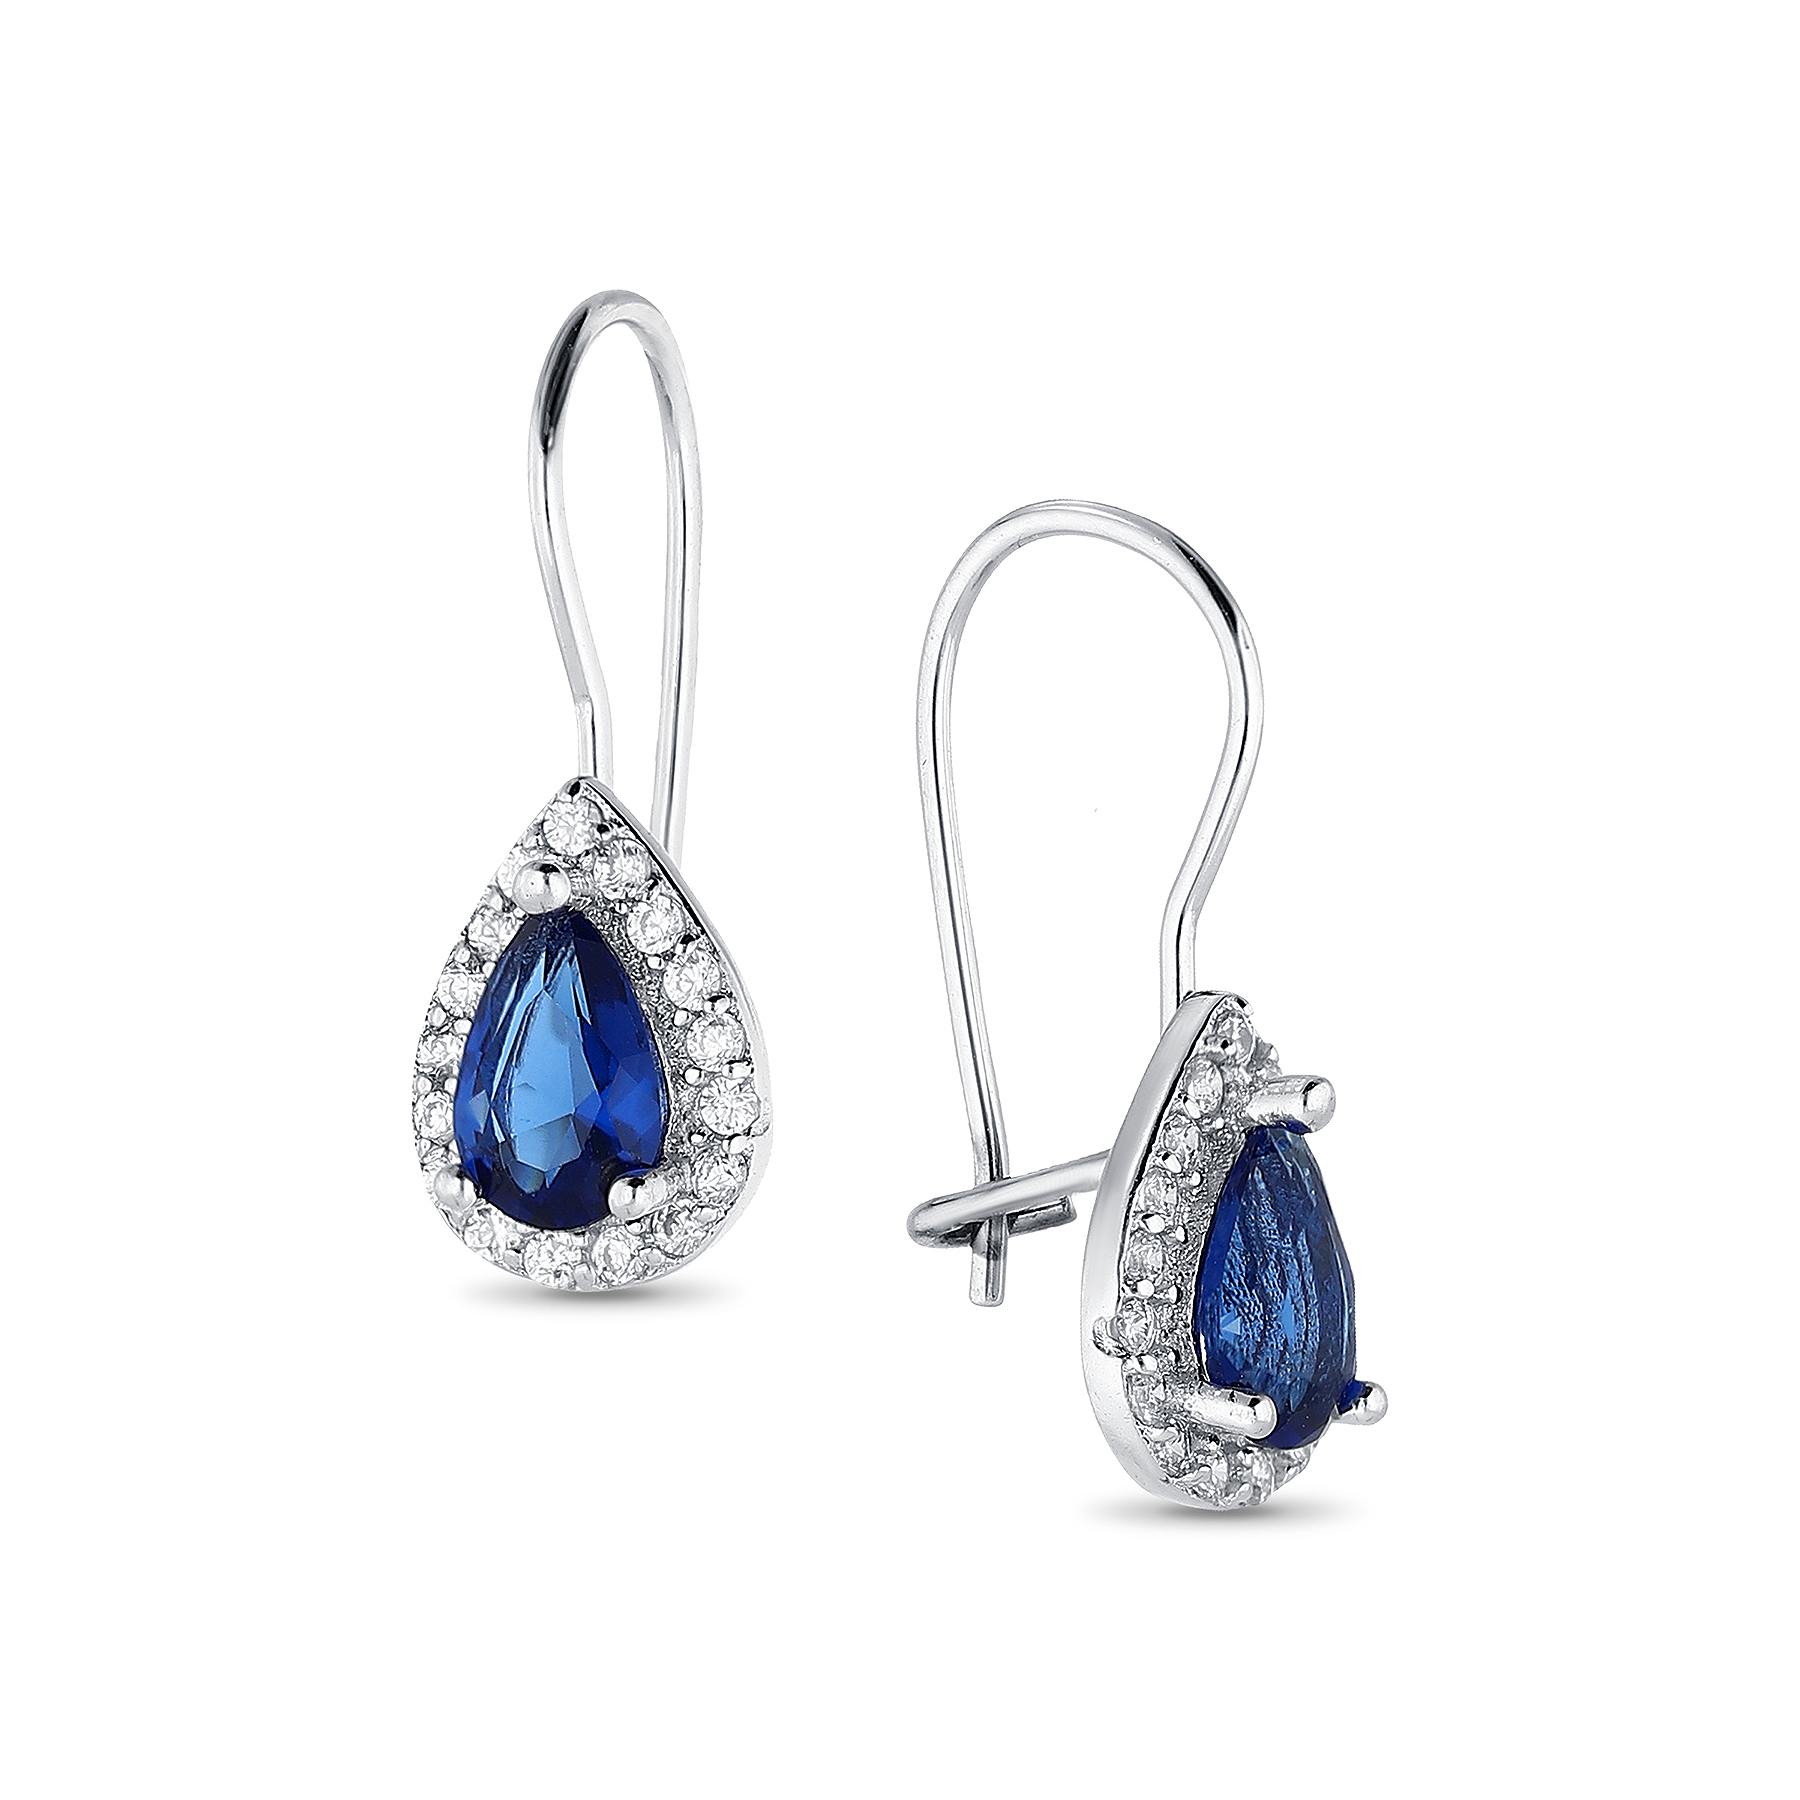 701-20173K - Wholesale 925 Sterling Silver Kidney Earrings Decorated With CZ And Plated With Rhodium